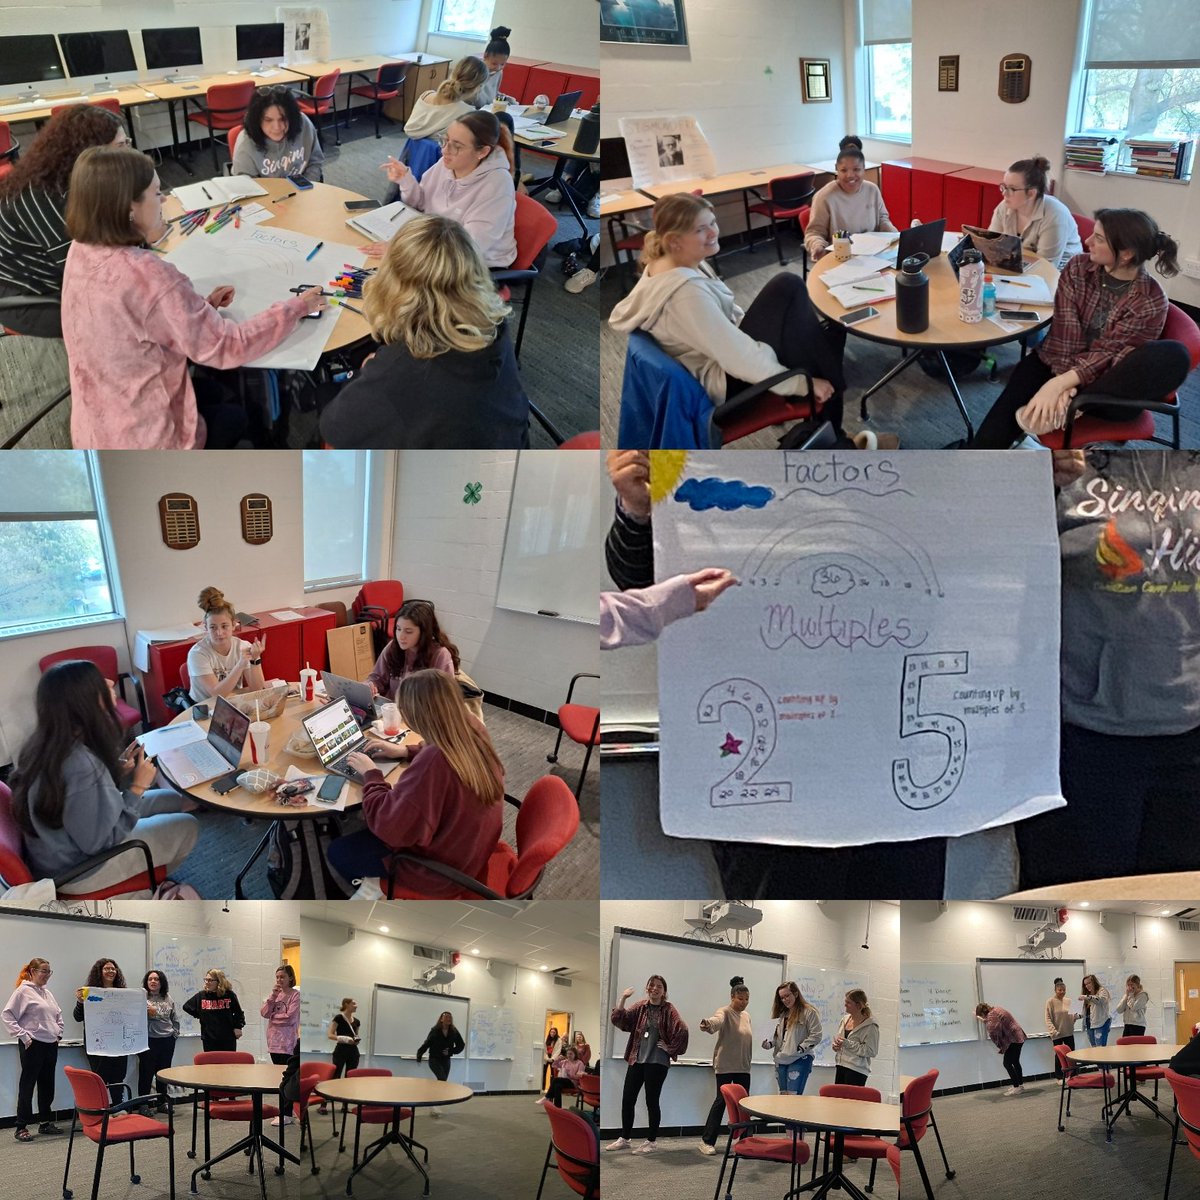 Tonight, we explored arts integration with a focus on creating inclusive learning environments and engaged in cross disciplinary learning activities, including group discussions, performances, and creative play! 😊 Way to go, future educators🙌🎯 @UofHartford!